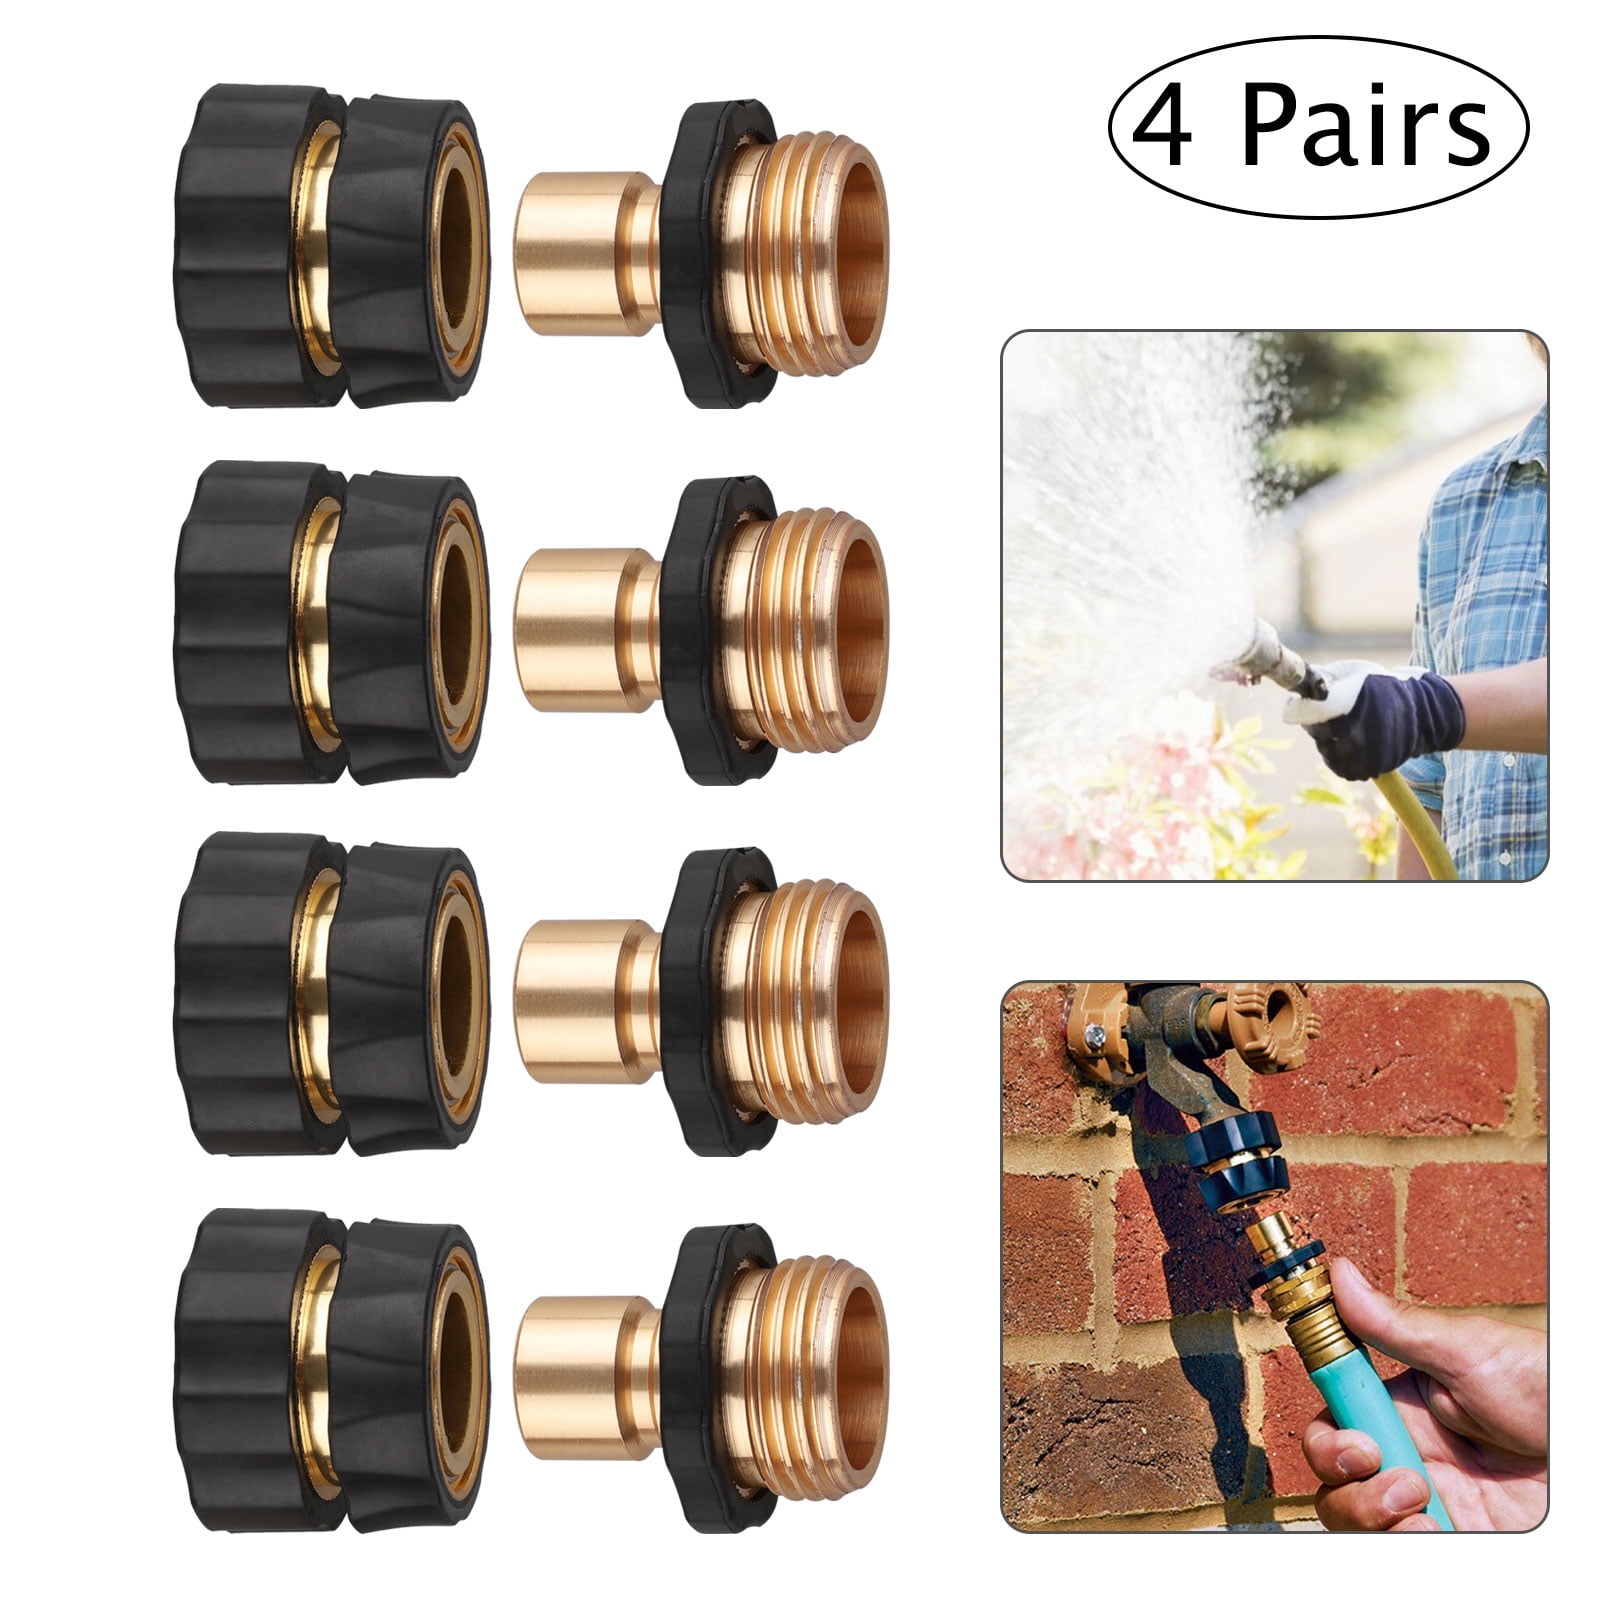 Brass Hose Connector Spray Nozzle Hose Connector Fitting Garden Anti-Rust Tool 